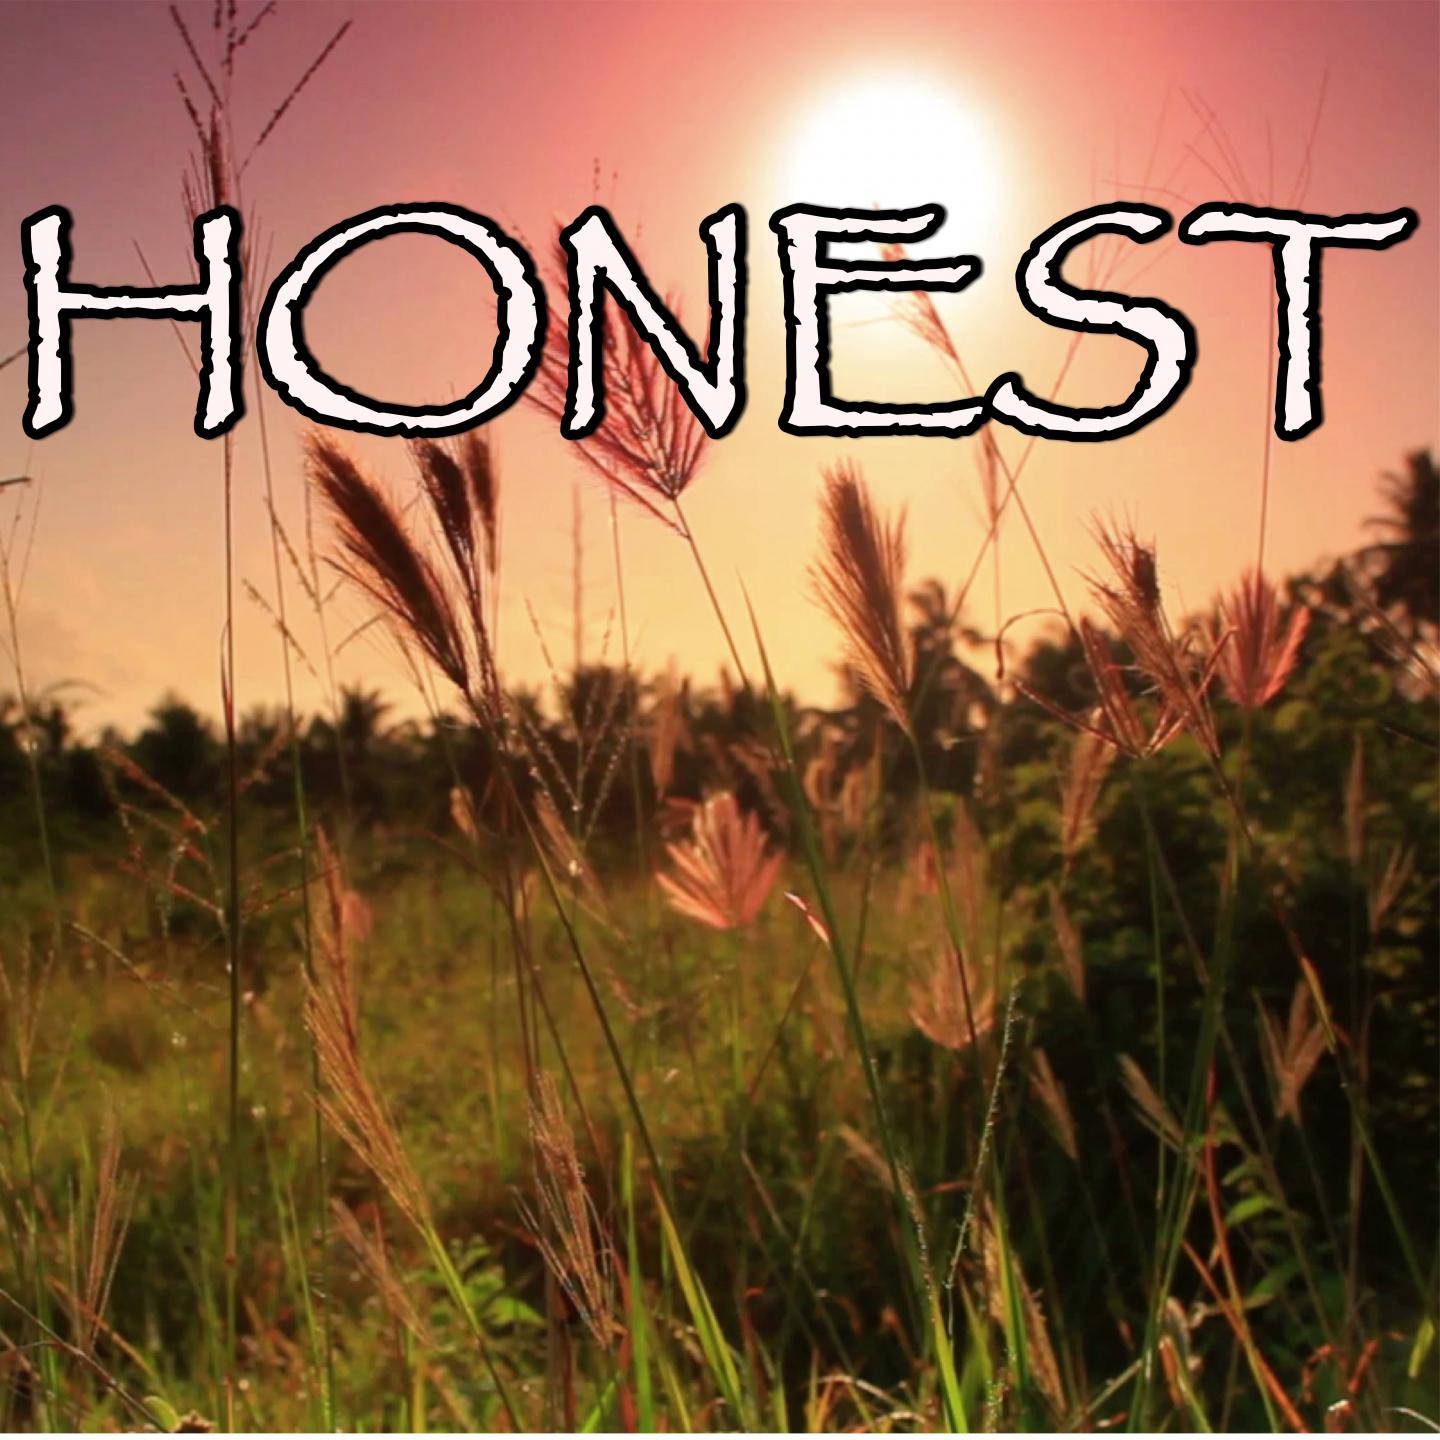 Honest - Tribute to The Chainsmokers